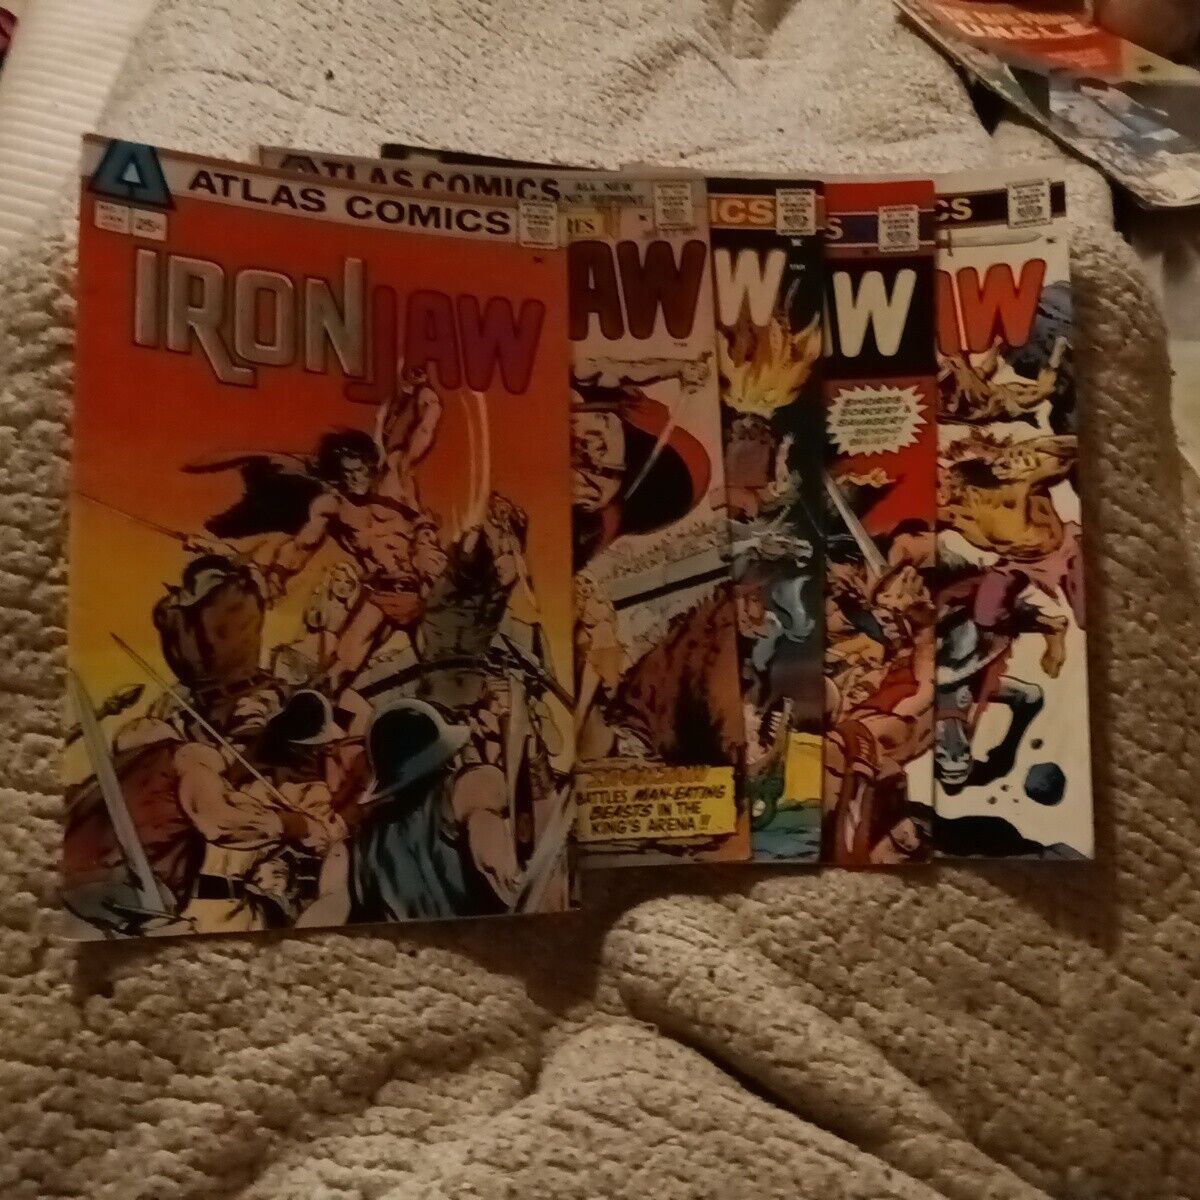 Iron Jaw #1-4 + Barbarians 1 Complete Set (1975 Atlas/Seaboard) Lot 1 2 3 4